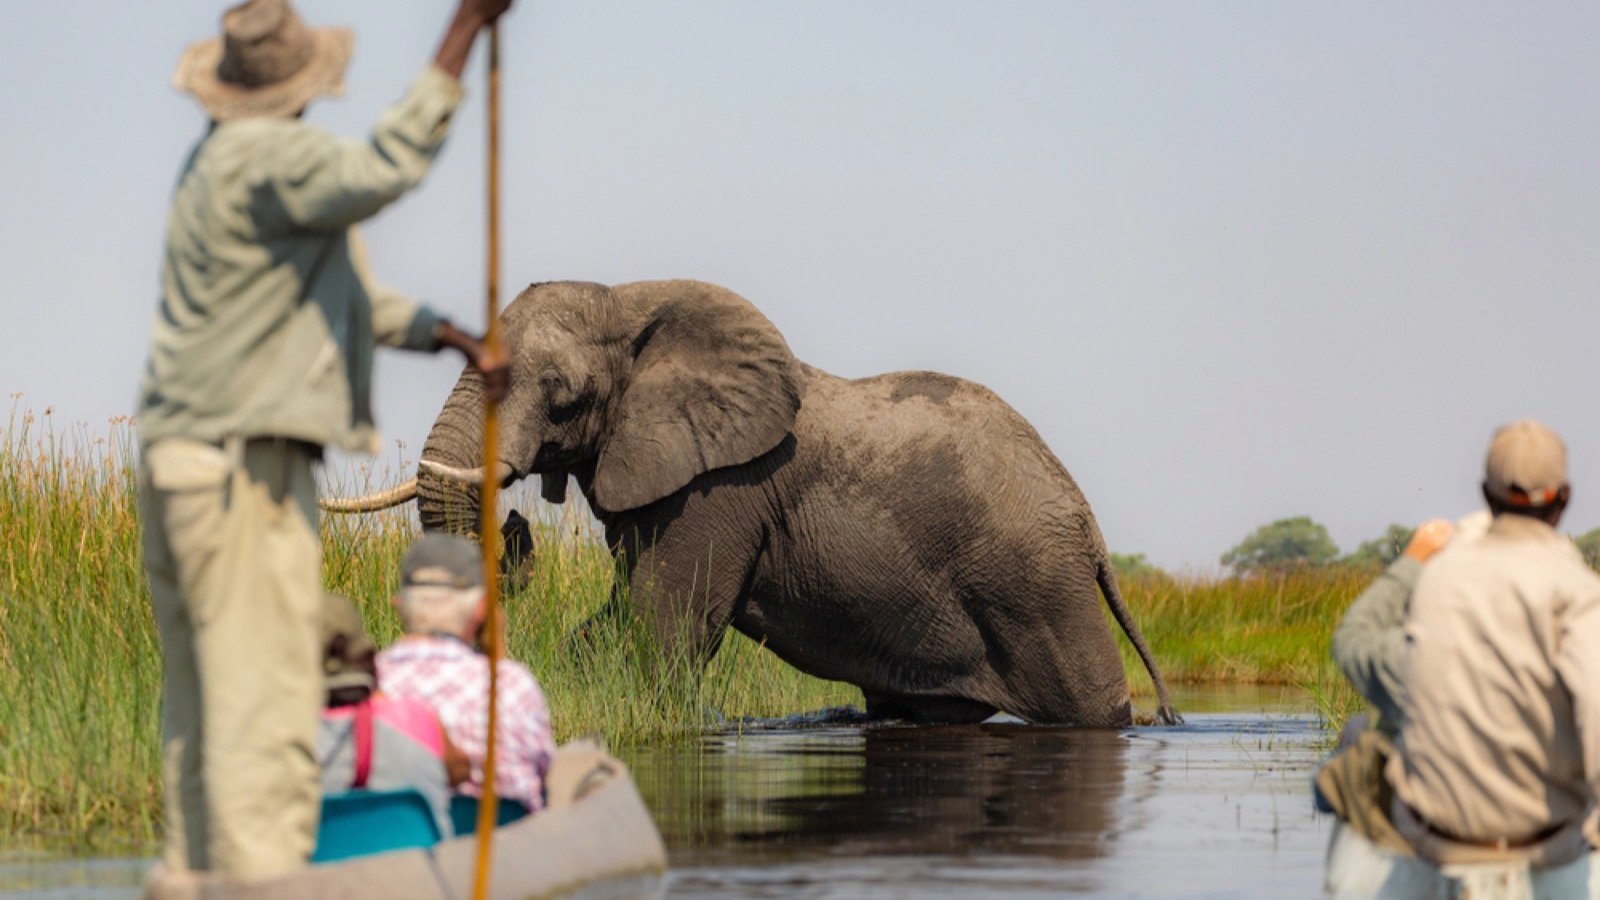 <p>If you’re feeling brave, consider a relaxing canoe safari in the Okavango Delta, Botswana, or floating down the Zambezi River in Zimbabwe. This area is home to many hippos and crocodiles. Getting close to them is a fantastic opportunity.</p><p>You may also be lucky enough to see enormous elephants and other African animals and species on the riverbanks.</p>